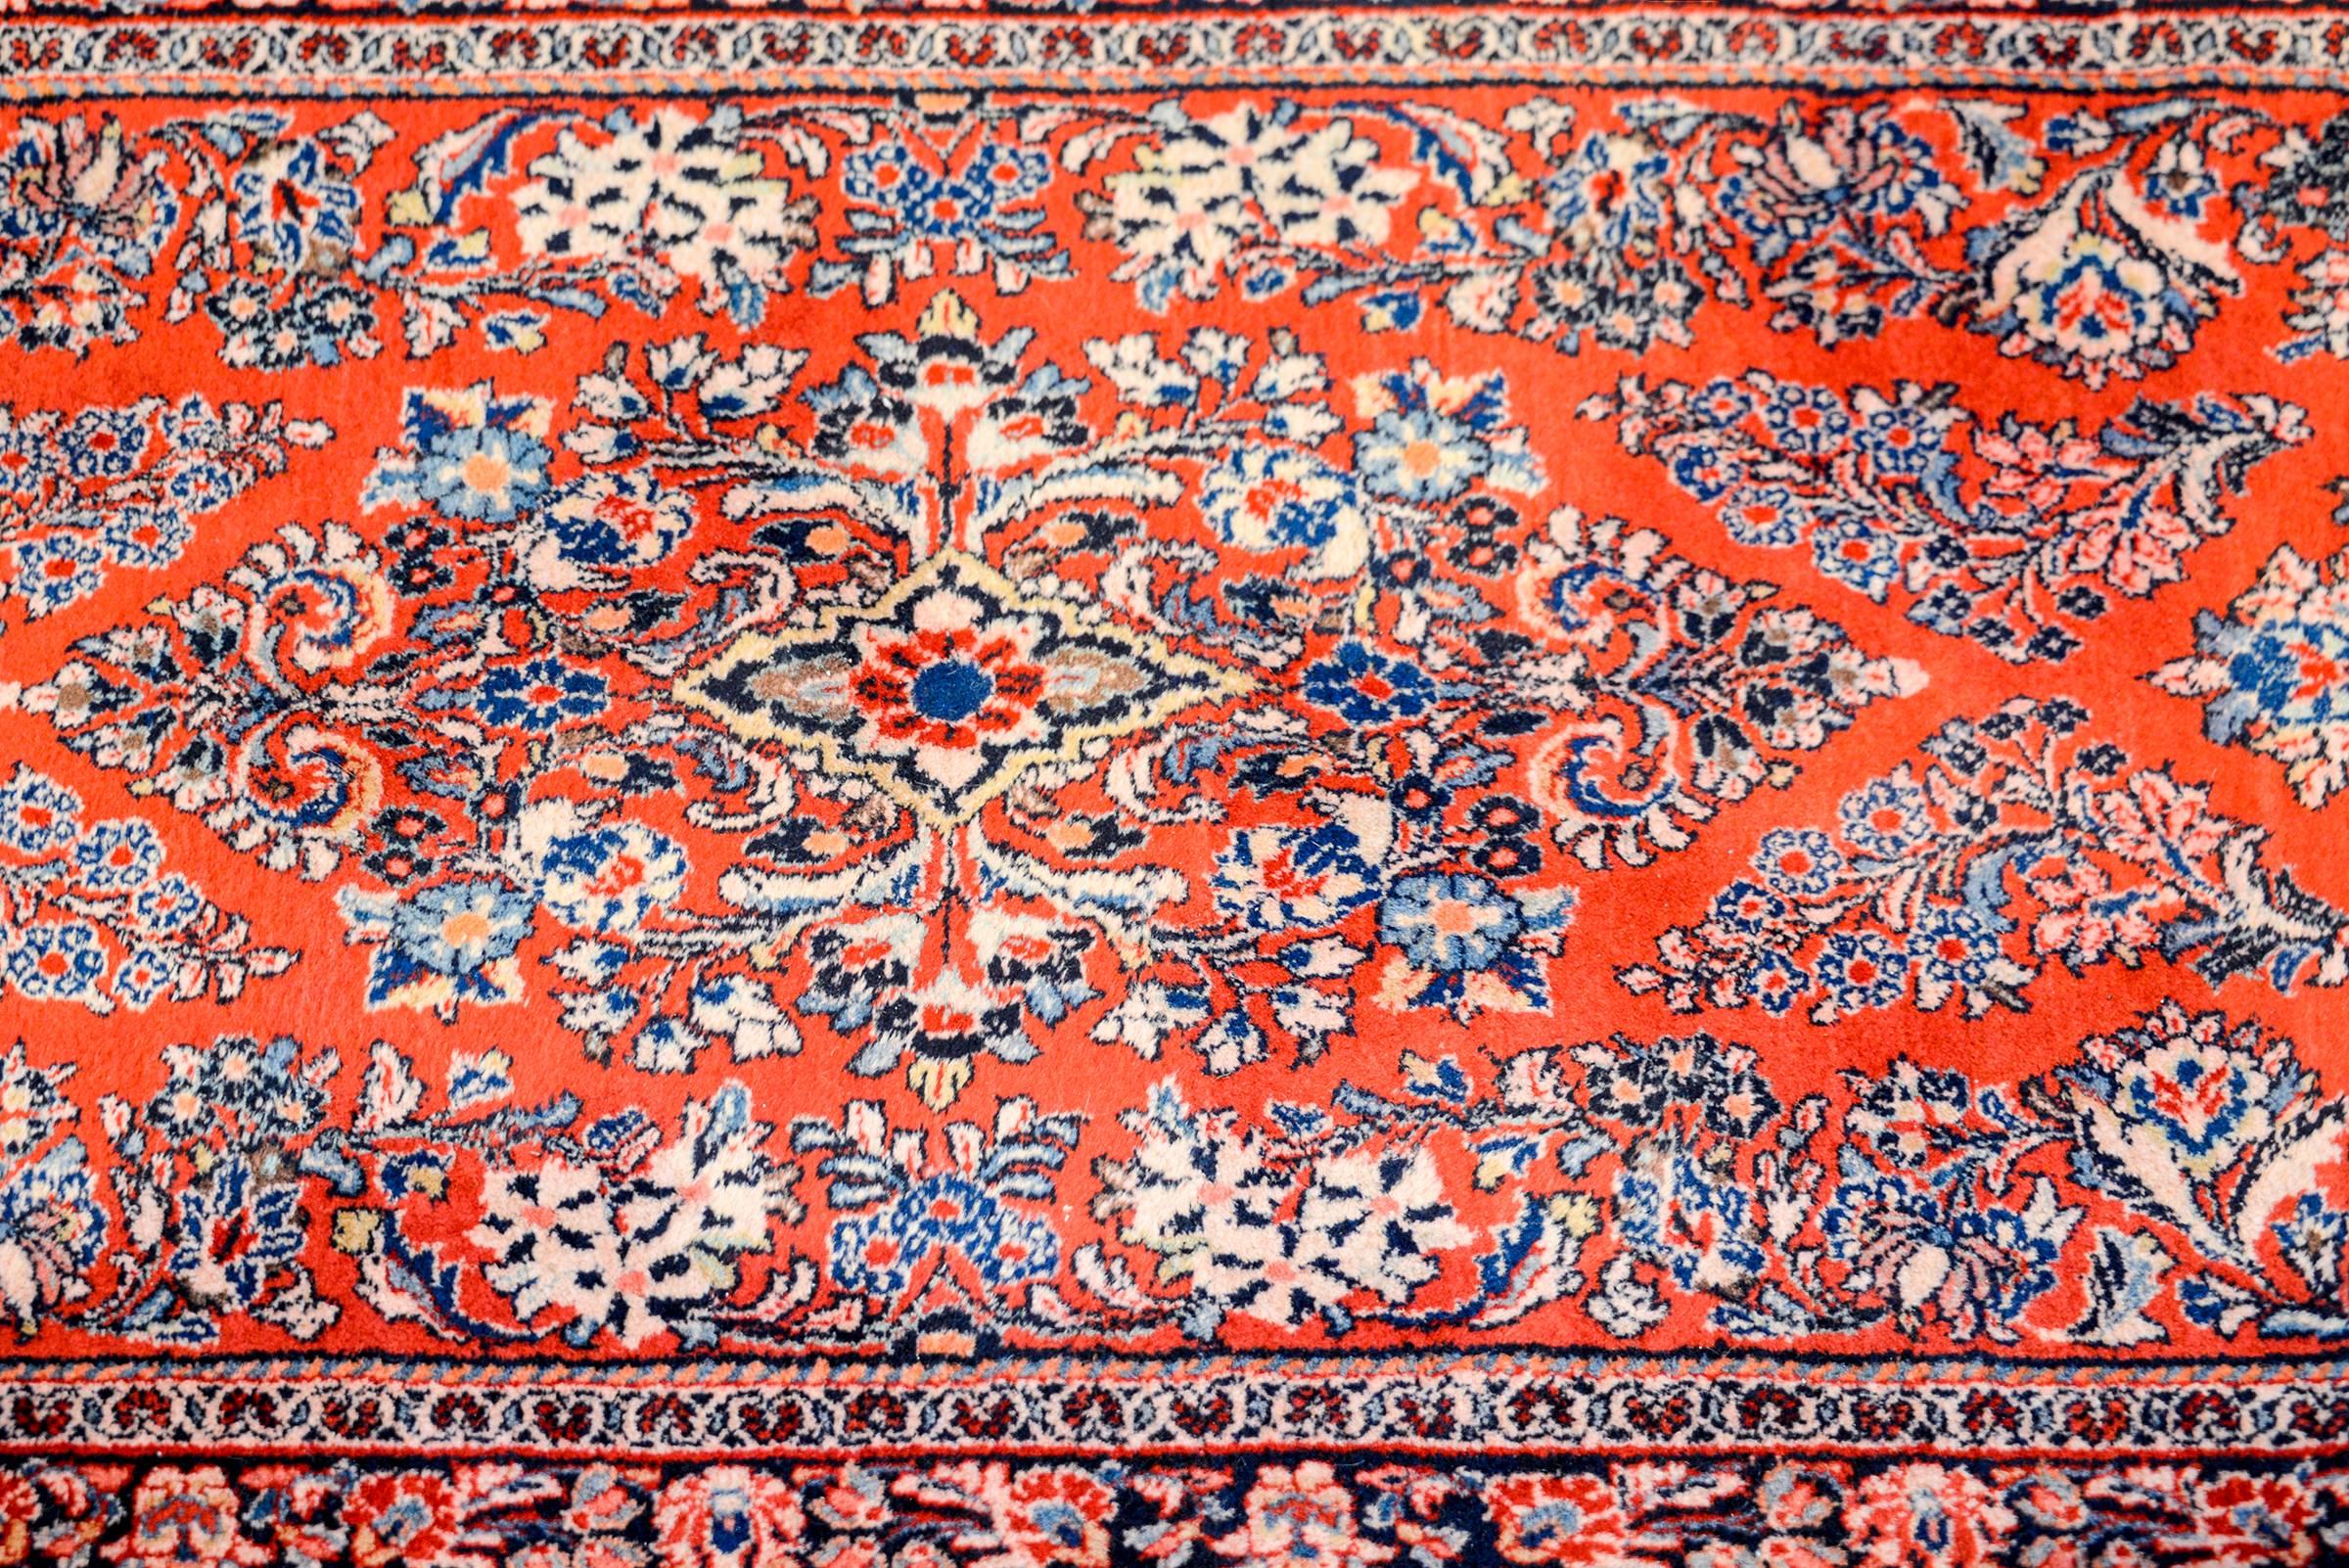 A beautiful early 20th century Persian Sarouk rug with a beautiful mirrored floral pattern woven in light and dark indigo, pink, brown, on a rich crimson background. The border is wonderfully rendered with a floral and vine pattern on an indigo